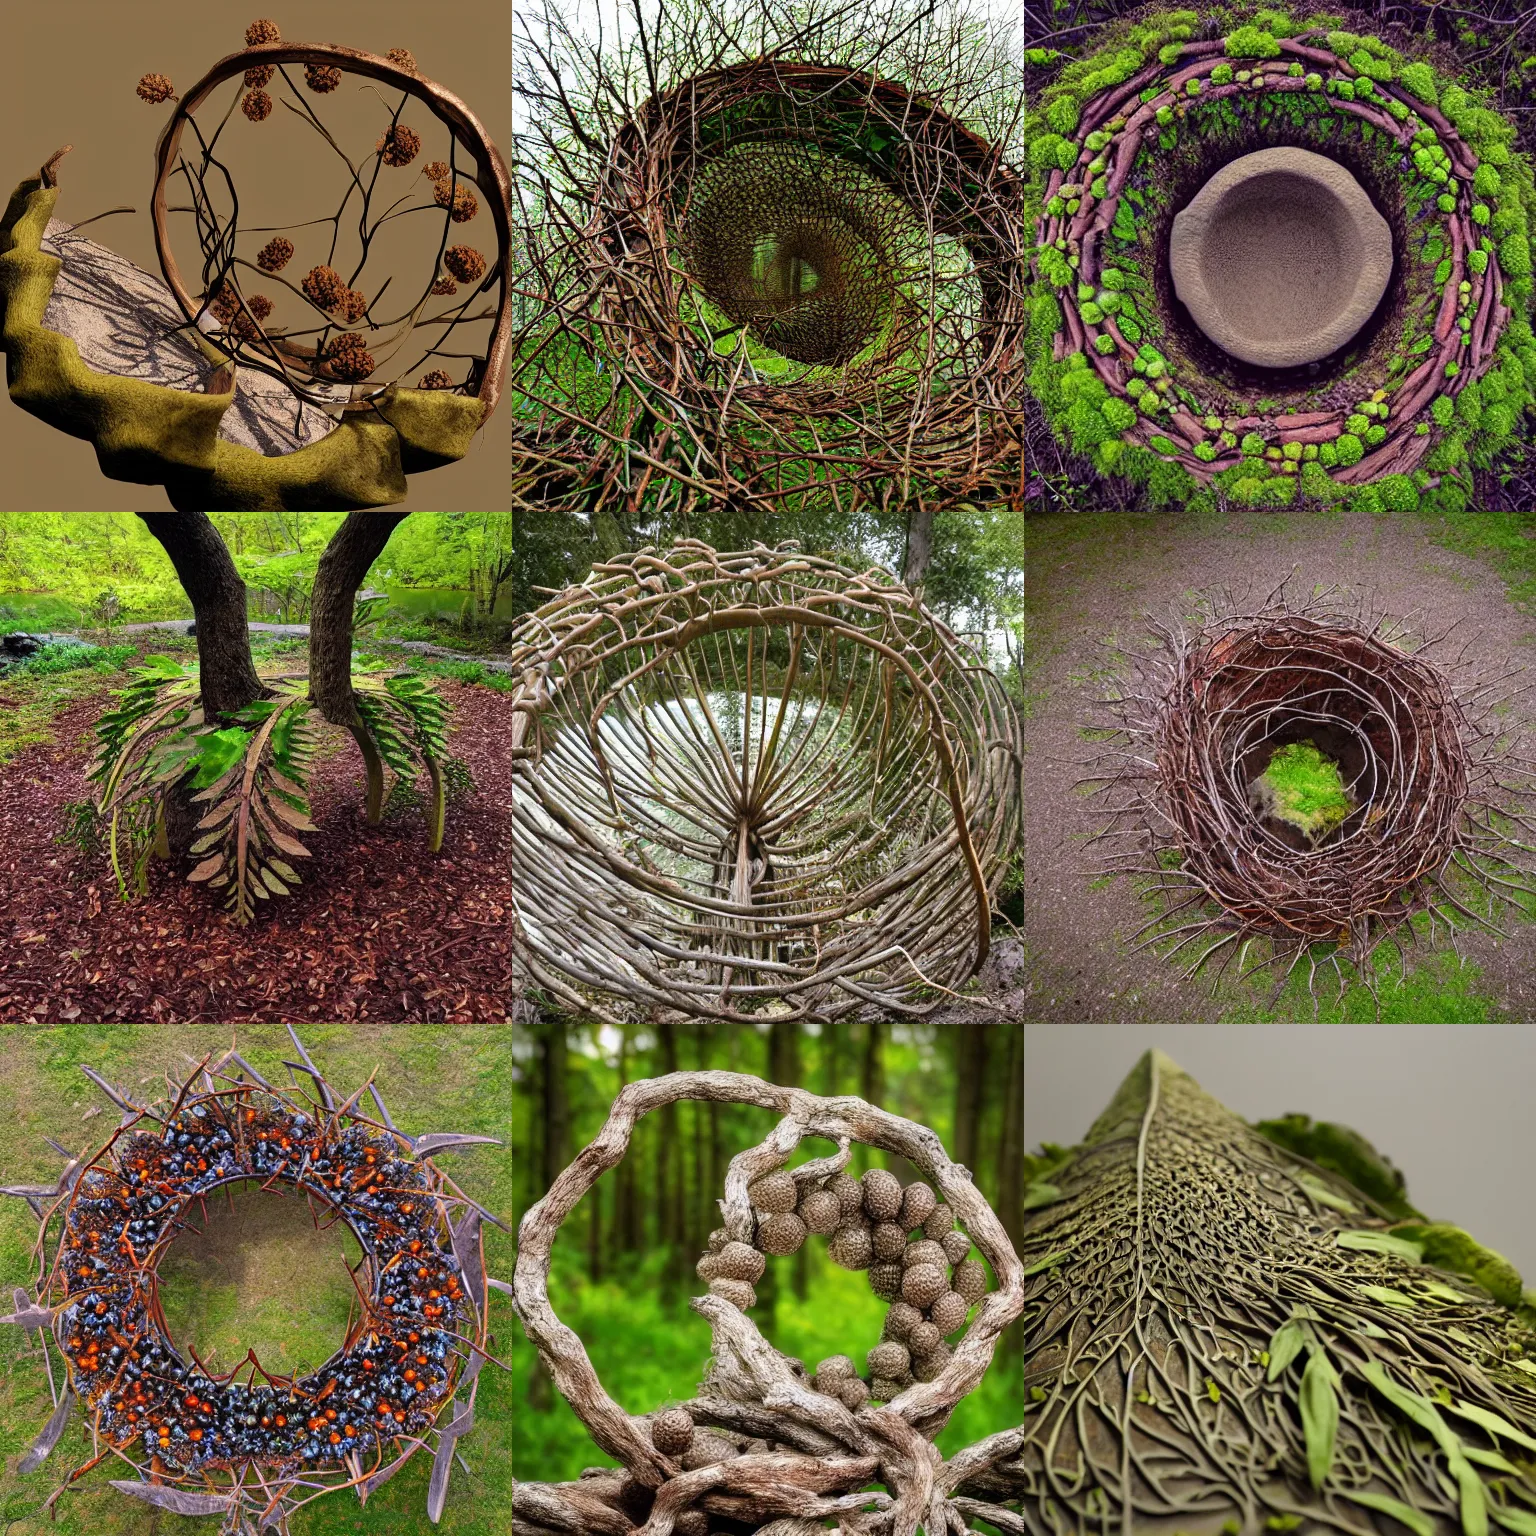 Prompt: an environment art sculpture by Nils-Udo, leaves twigs wood, nature, natural, round form, berries inside center of structure, leaf spiral pattern around structure